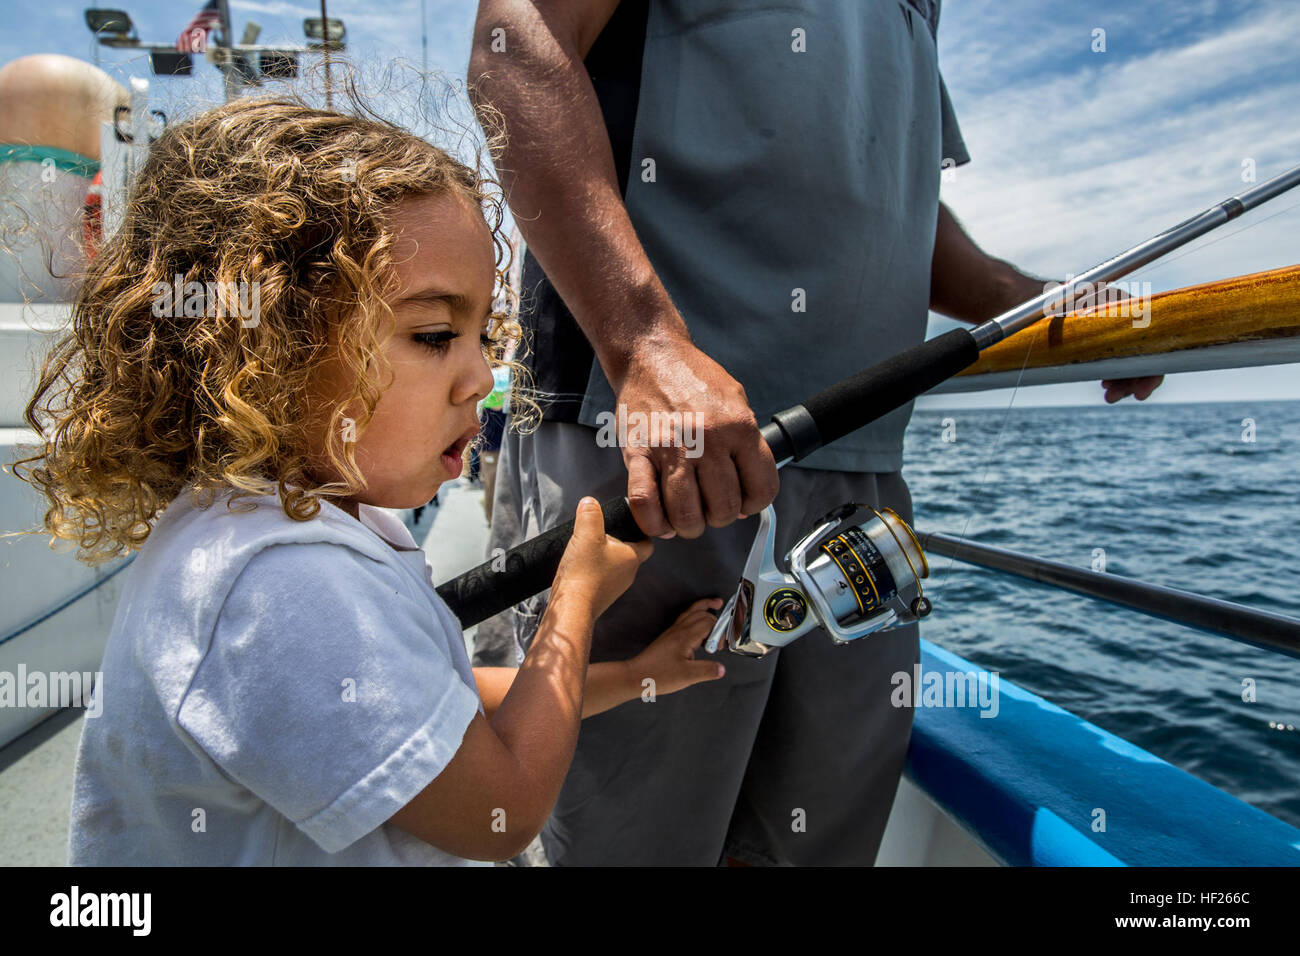 Major, 4, reels in a catch during a youth fishing trip aboard the fishing  vessel Dana Pride June 26, 2014. More than 30 service members and children  participated in the event. (U.S.